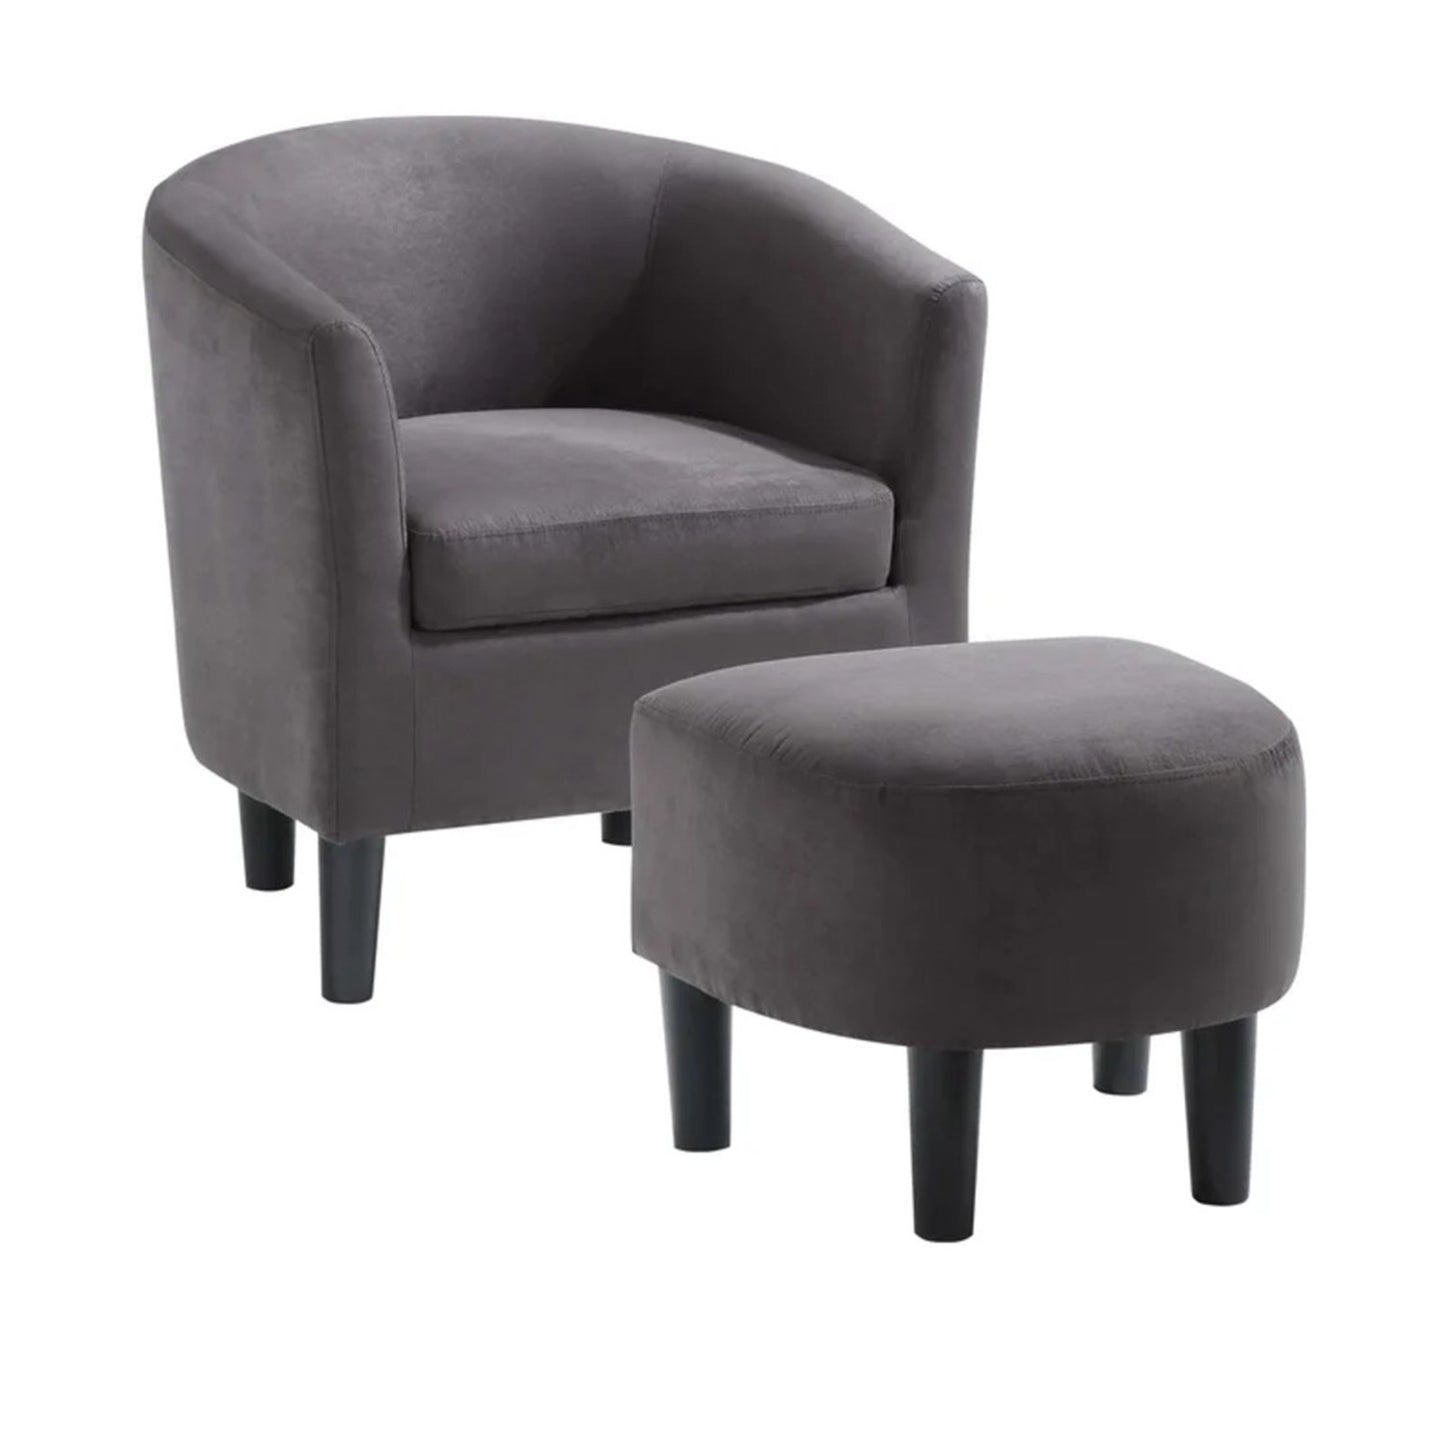 Sleek Accent Chairs With Ottomans Footrest Grey